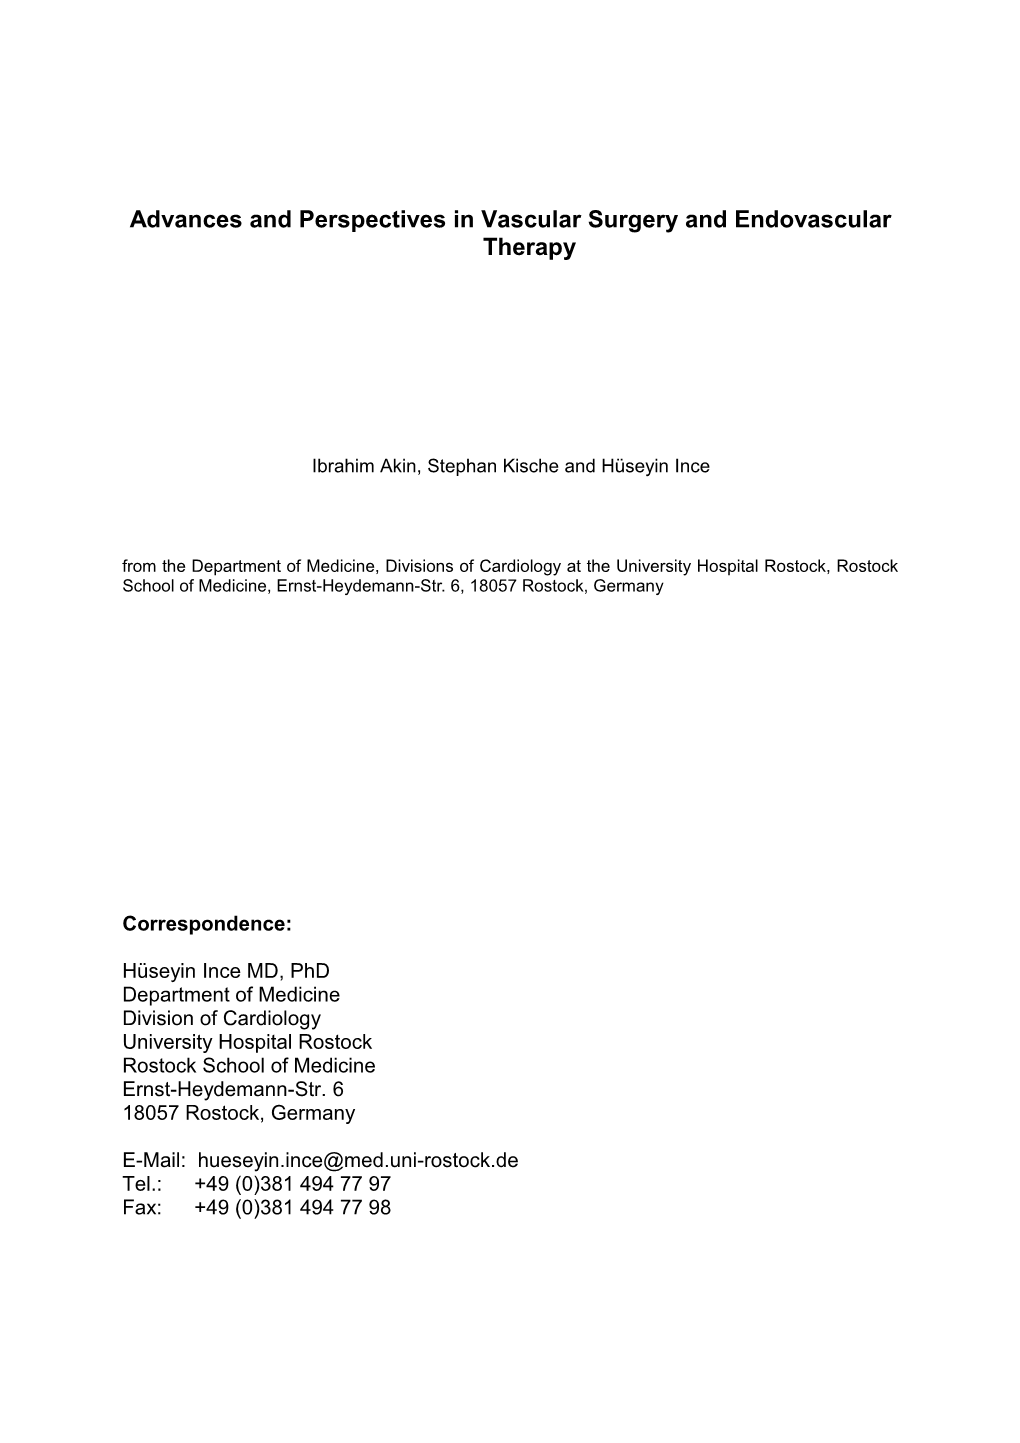 Advances and Perspectives in Vascular Surgery and Endovascular Therapy